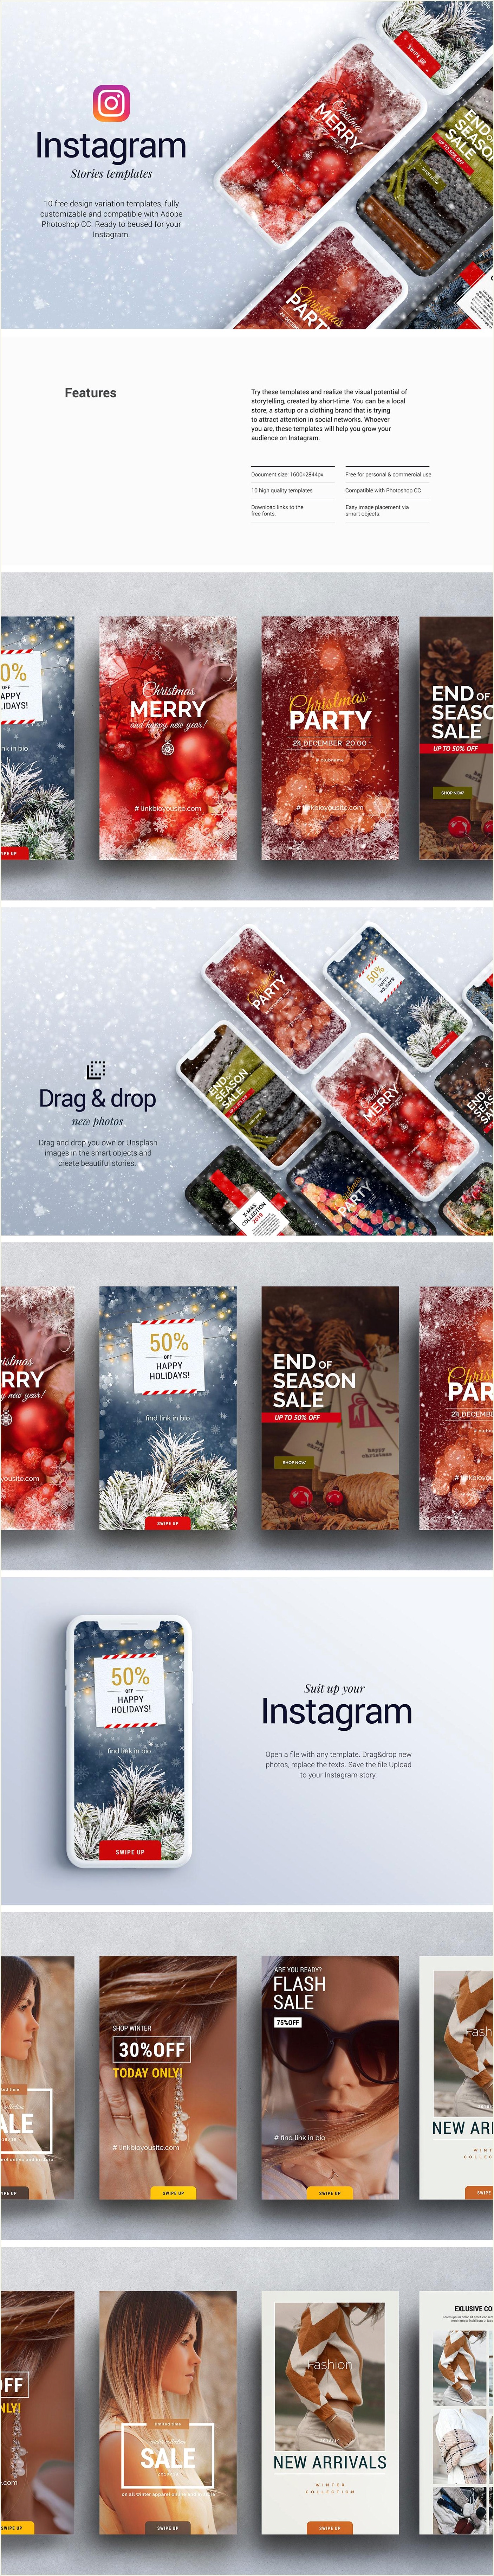 Free Christmas Calage Templates For Photoshop Cc